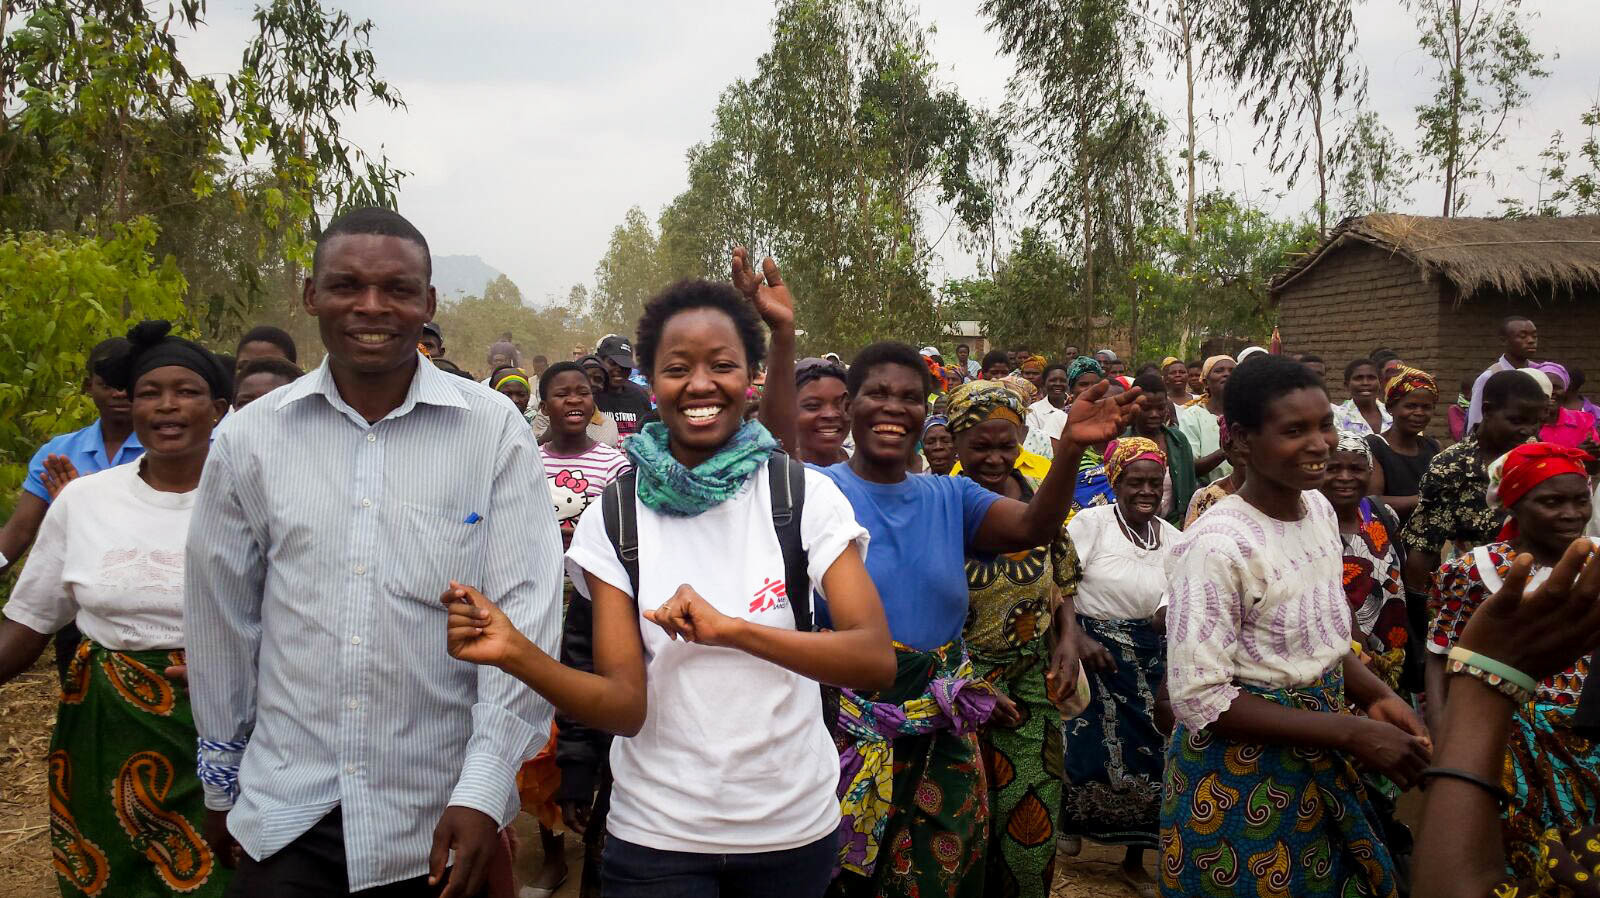 Researcher Chenai Mathabire, center, takes part in an HIV awareness campaign in Malawi in 2016.
